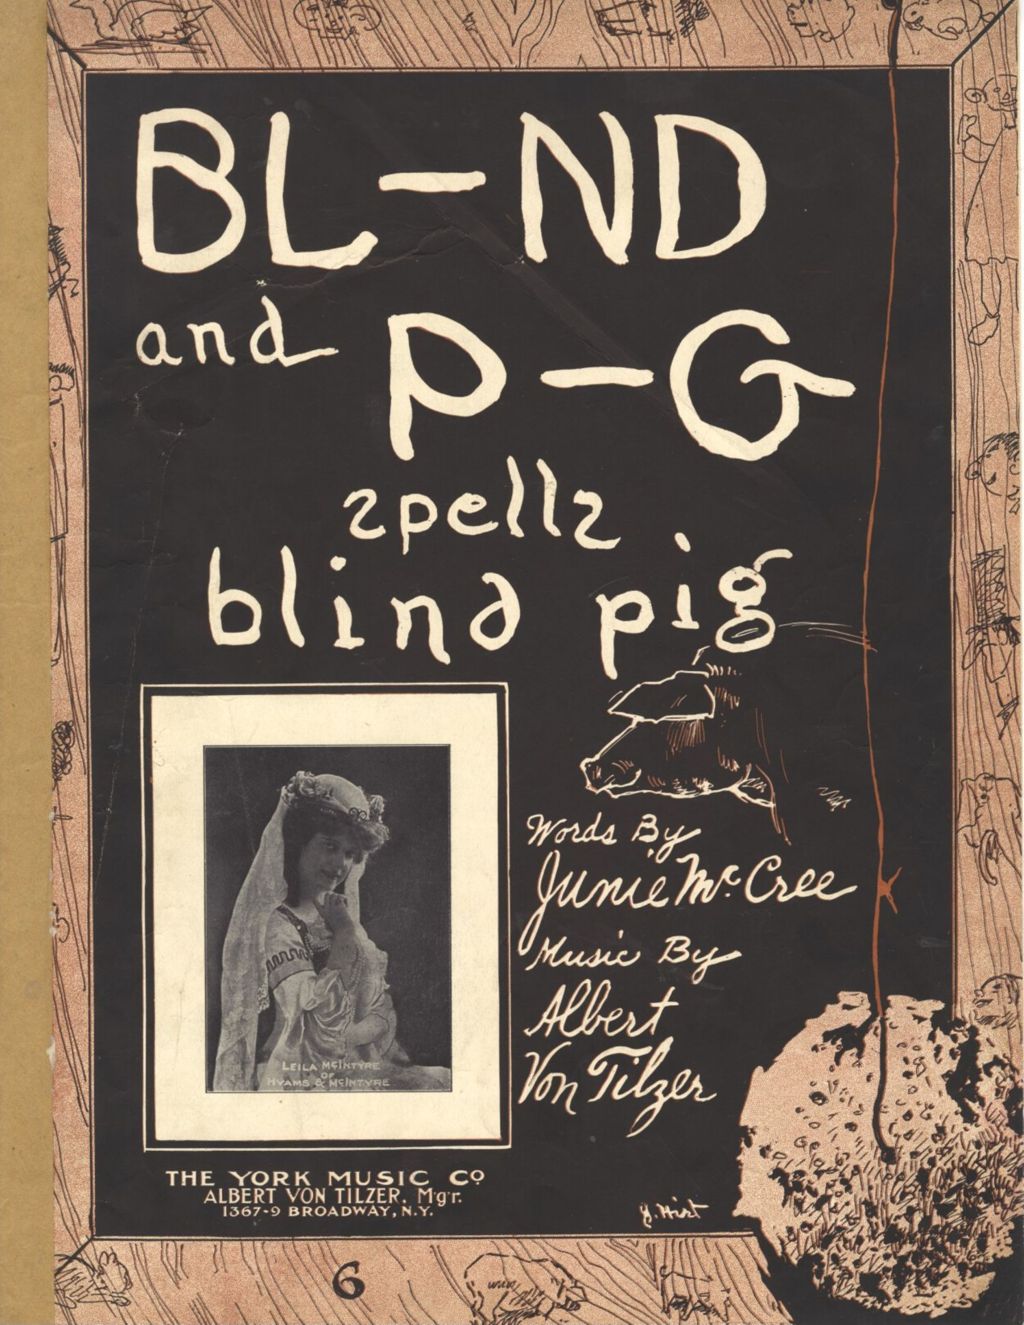 Miniature of BL-ND and P-G Spells Blind Pig